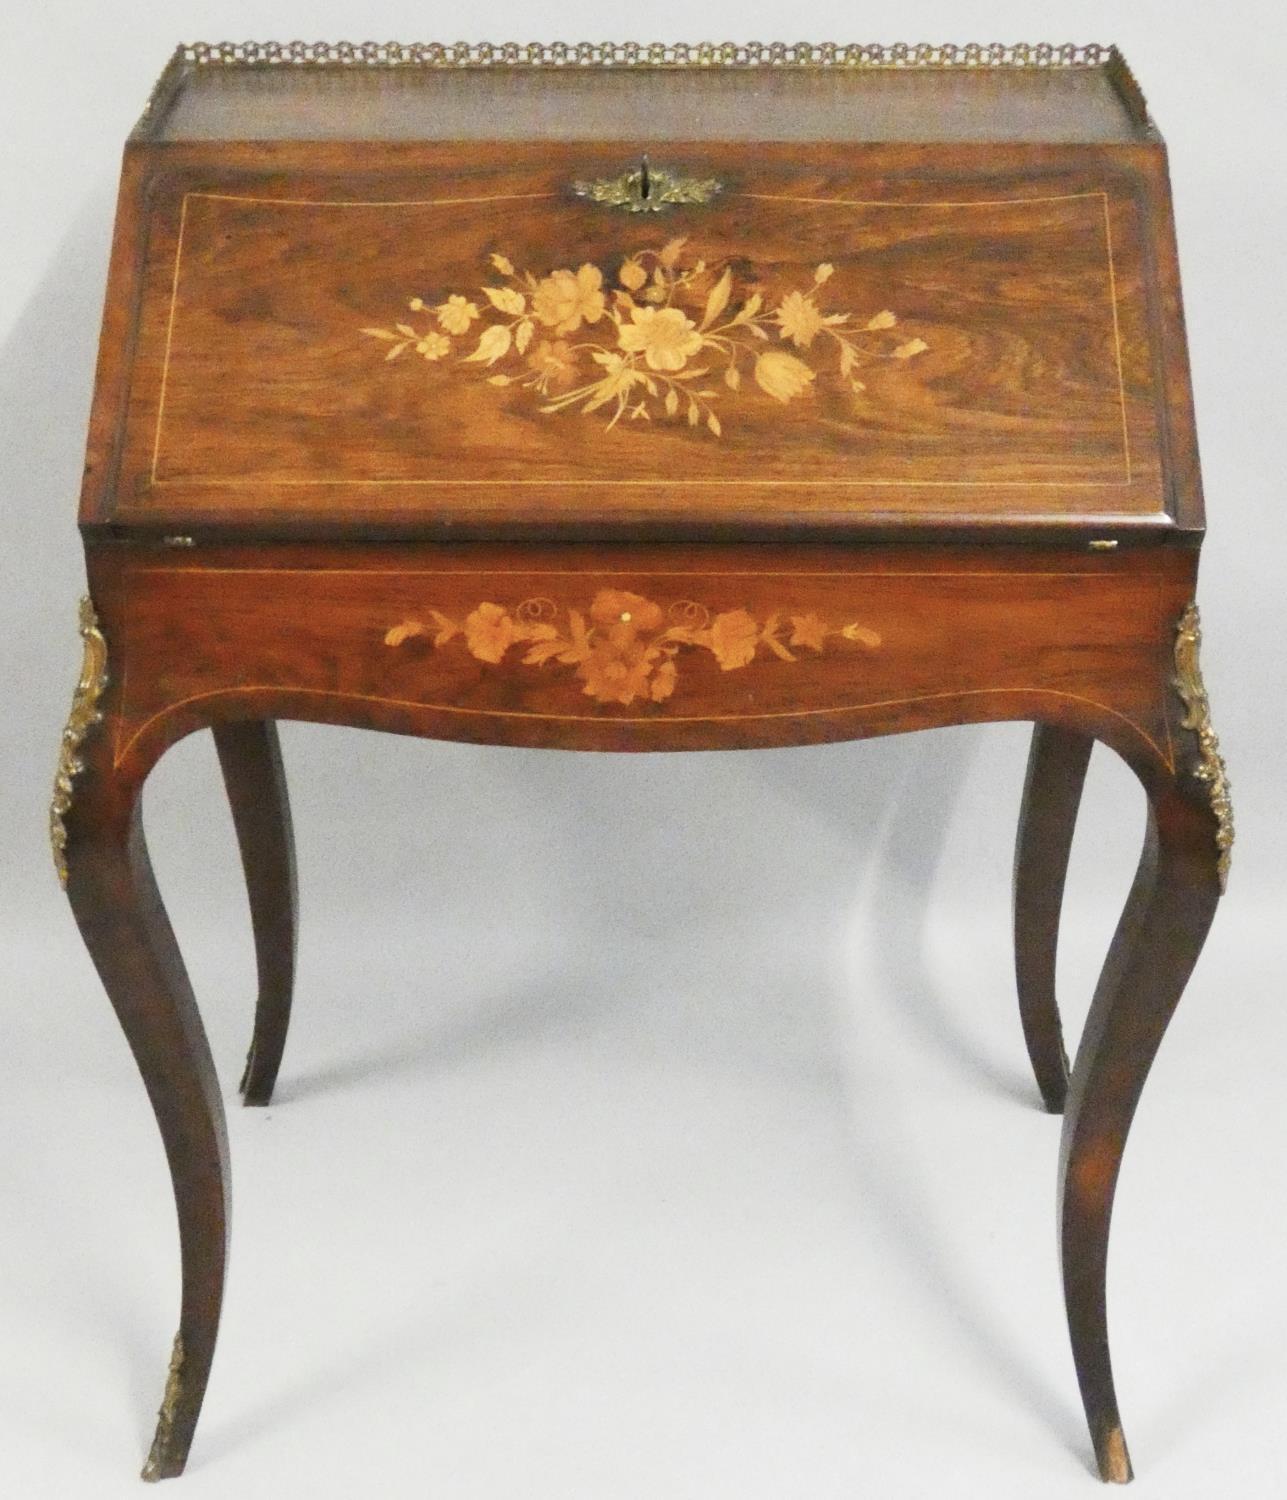 An Edwardian rosewood and inlaid Bonheur du Jour, the fall front with floral inlay, opening to